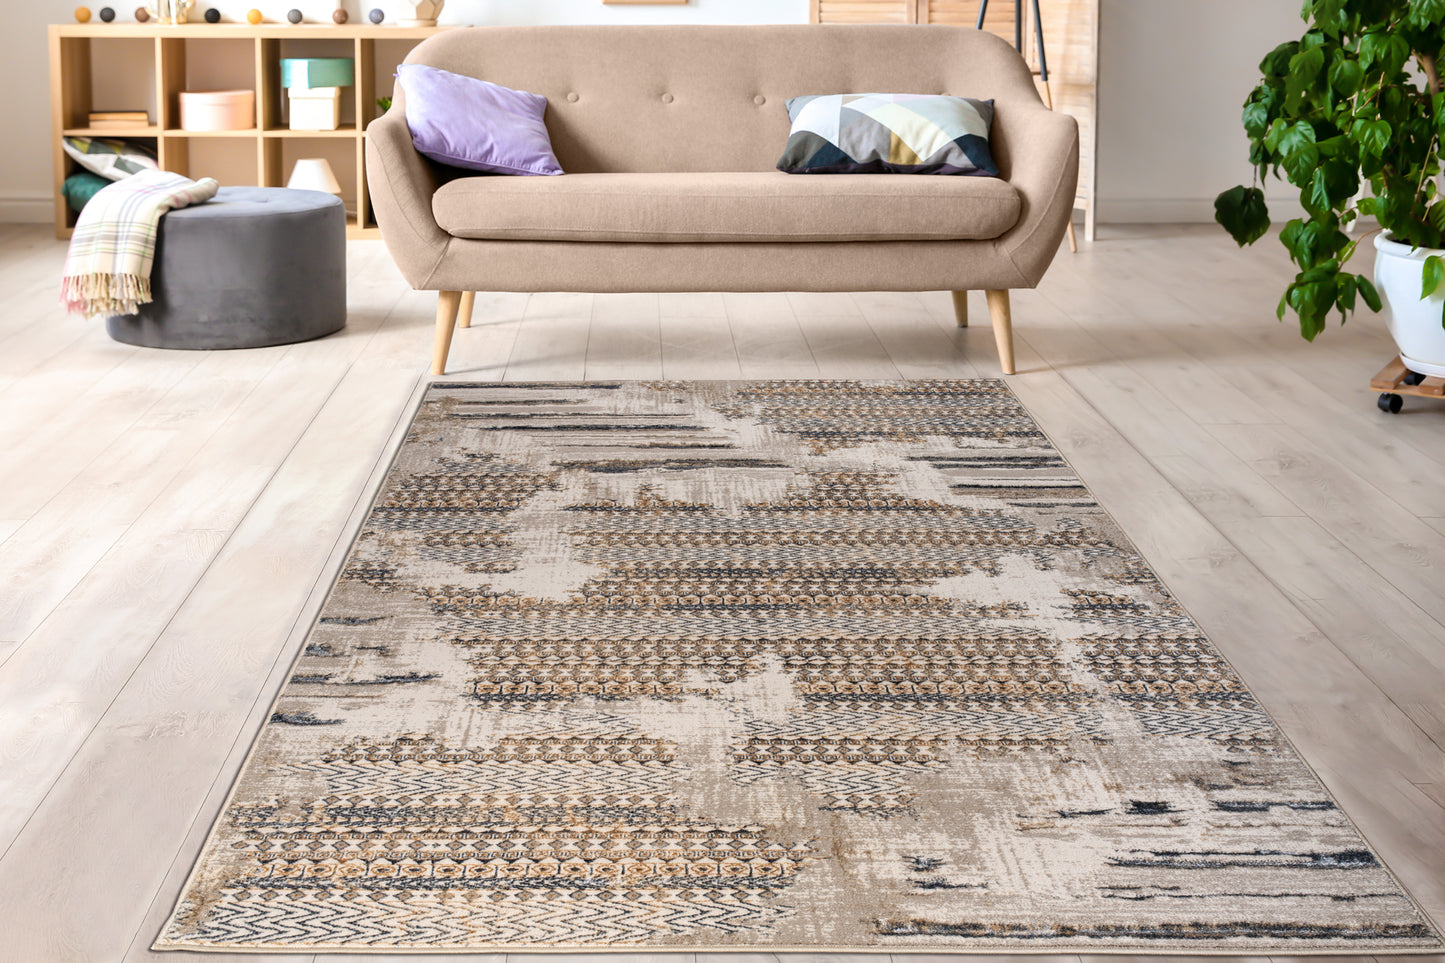 beige brown grey metalic abstract rustic modern contemporary area rug 2x8, 3x10, 2x10 ft Long Runner Rug, Hallway, Balcony, Entry Way, Kitchen, Stairs